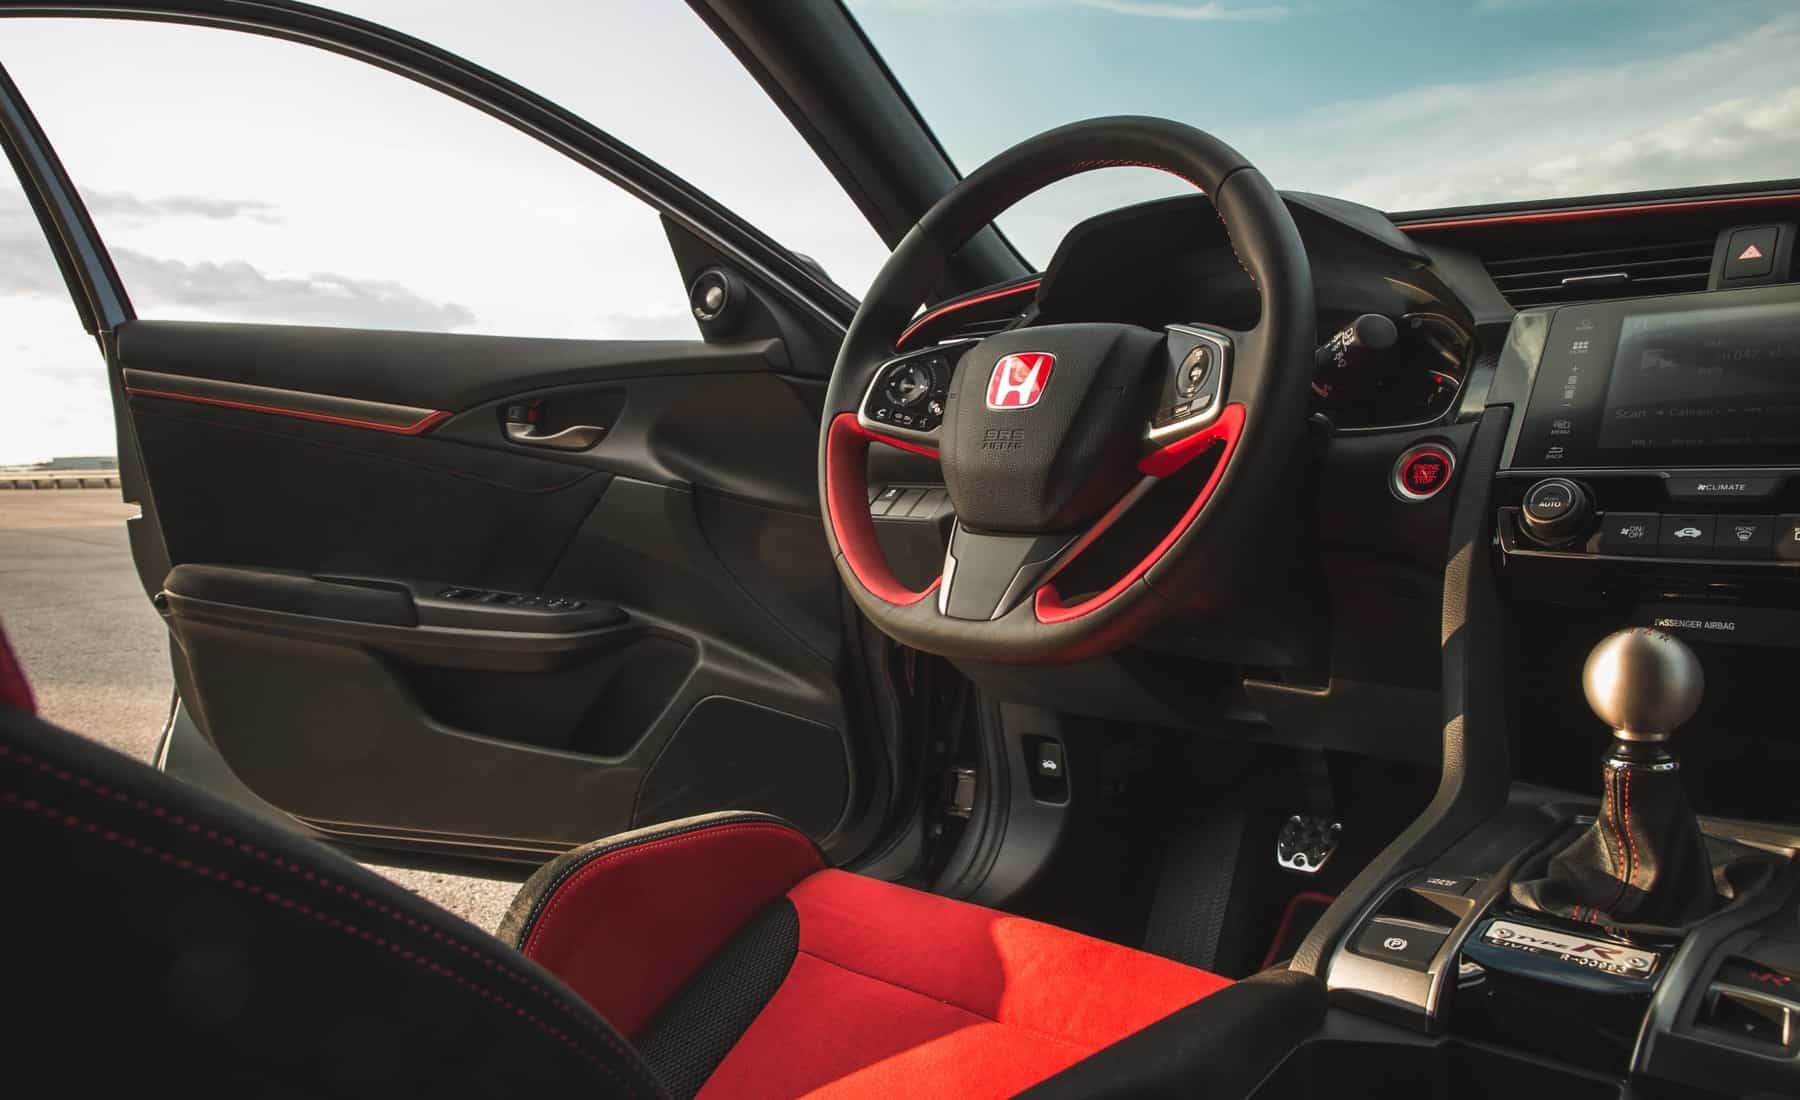 2017 Honda Civic Type R Interior Cockpit And Steering (View 28 of 48)